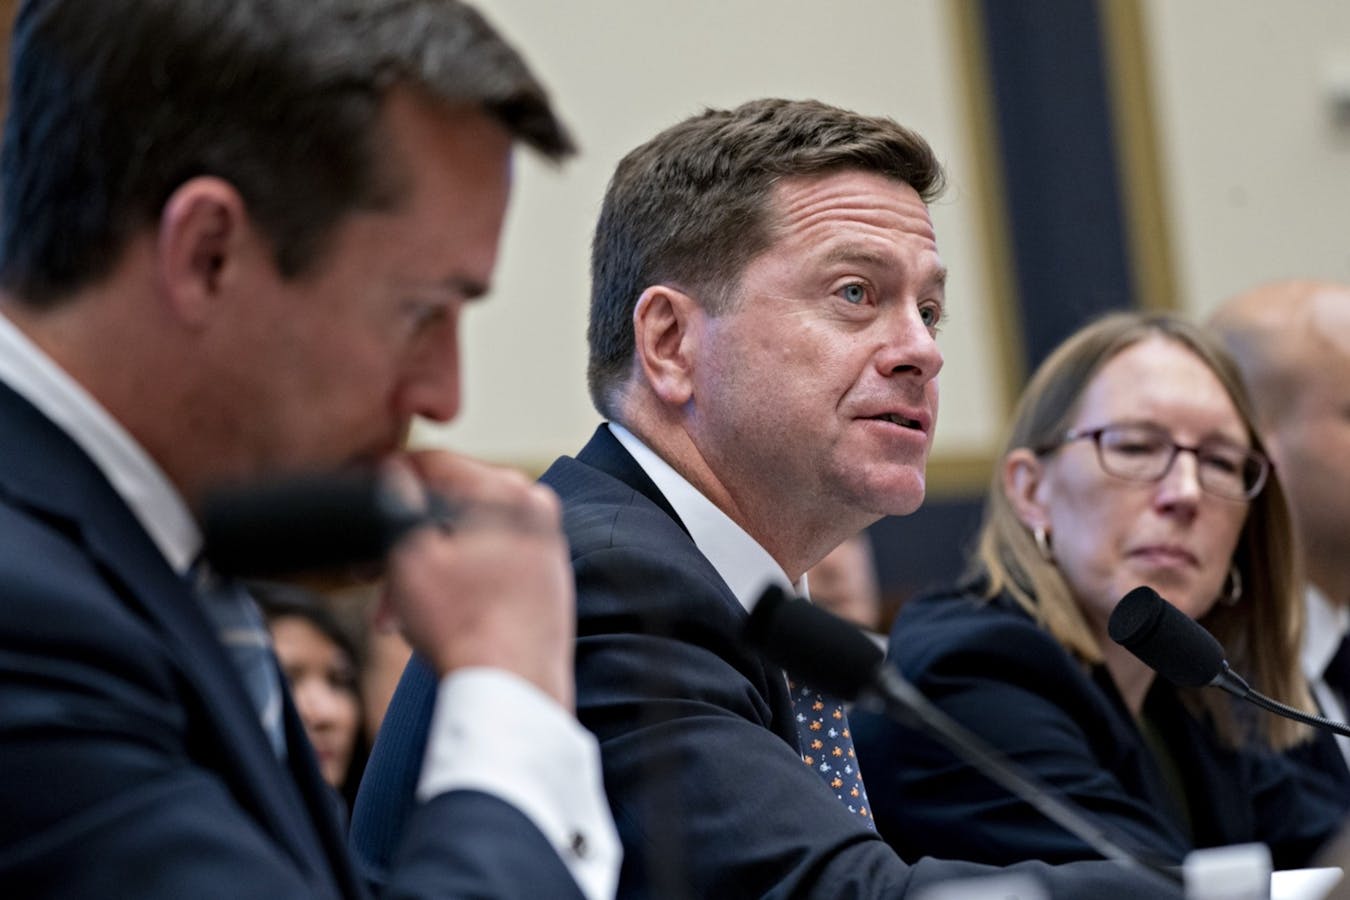 Jay Clayton, former chairman of the U.S. Securities and Exchange Commission, in 2019. Photo: Bloomberg